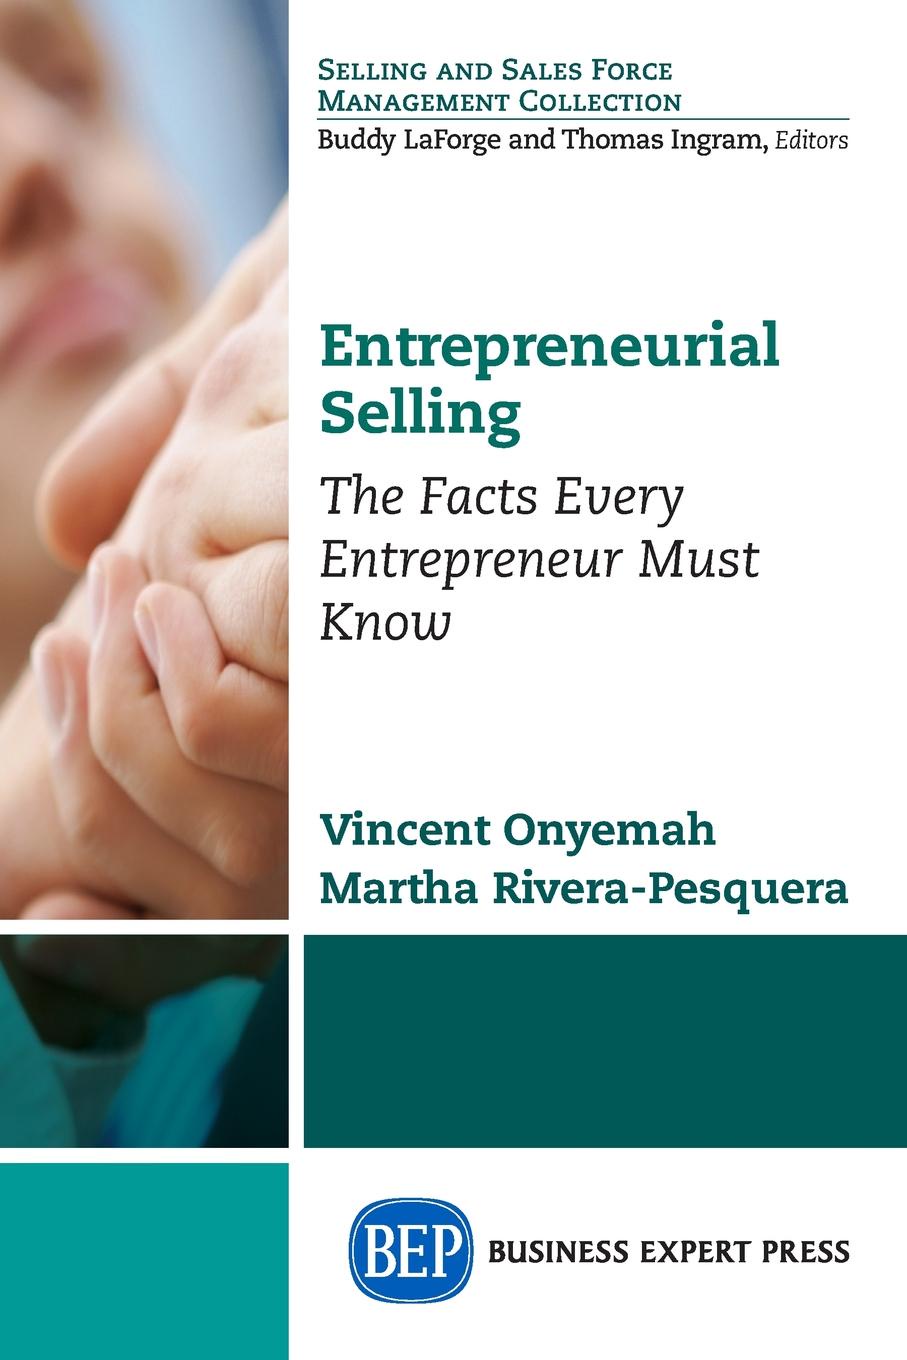 Entrepreneurial Selling. The Facts Every Entrepreneur Must Know